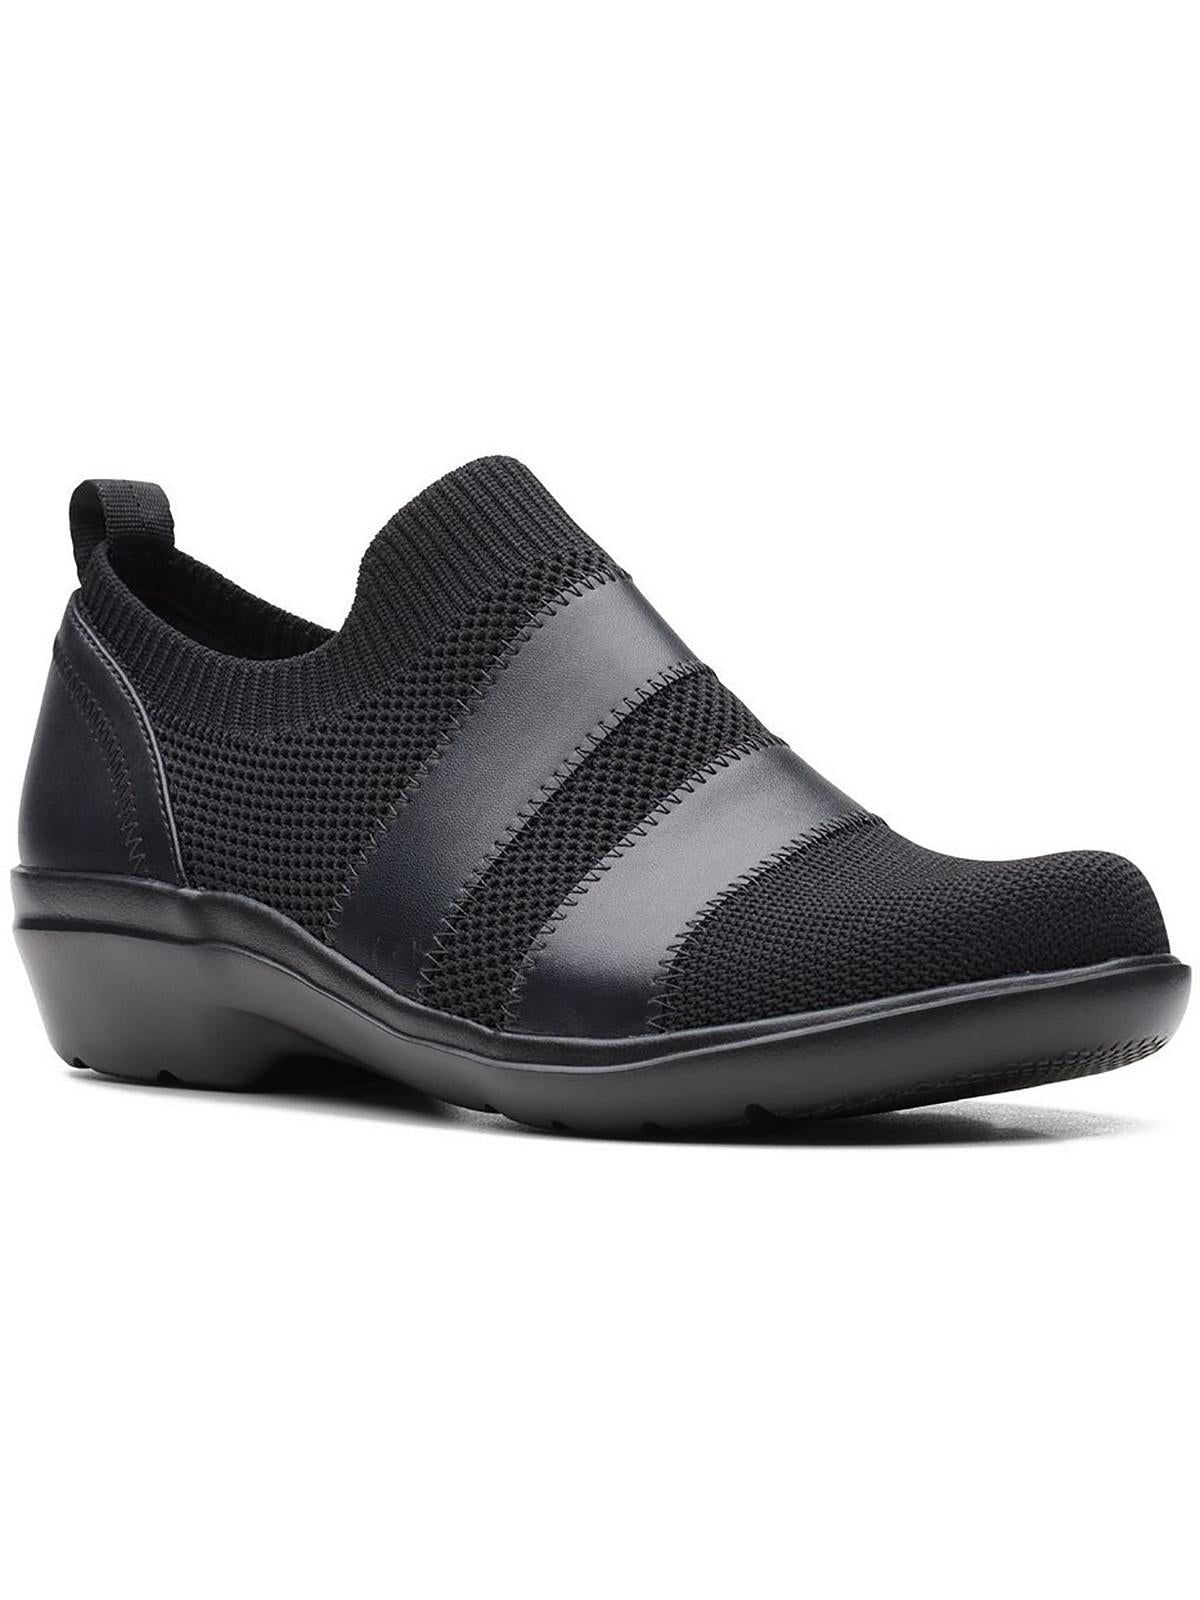 Clarks Womens Laceless Knit Casual And Fashion Sneakers In Black